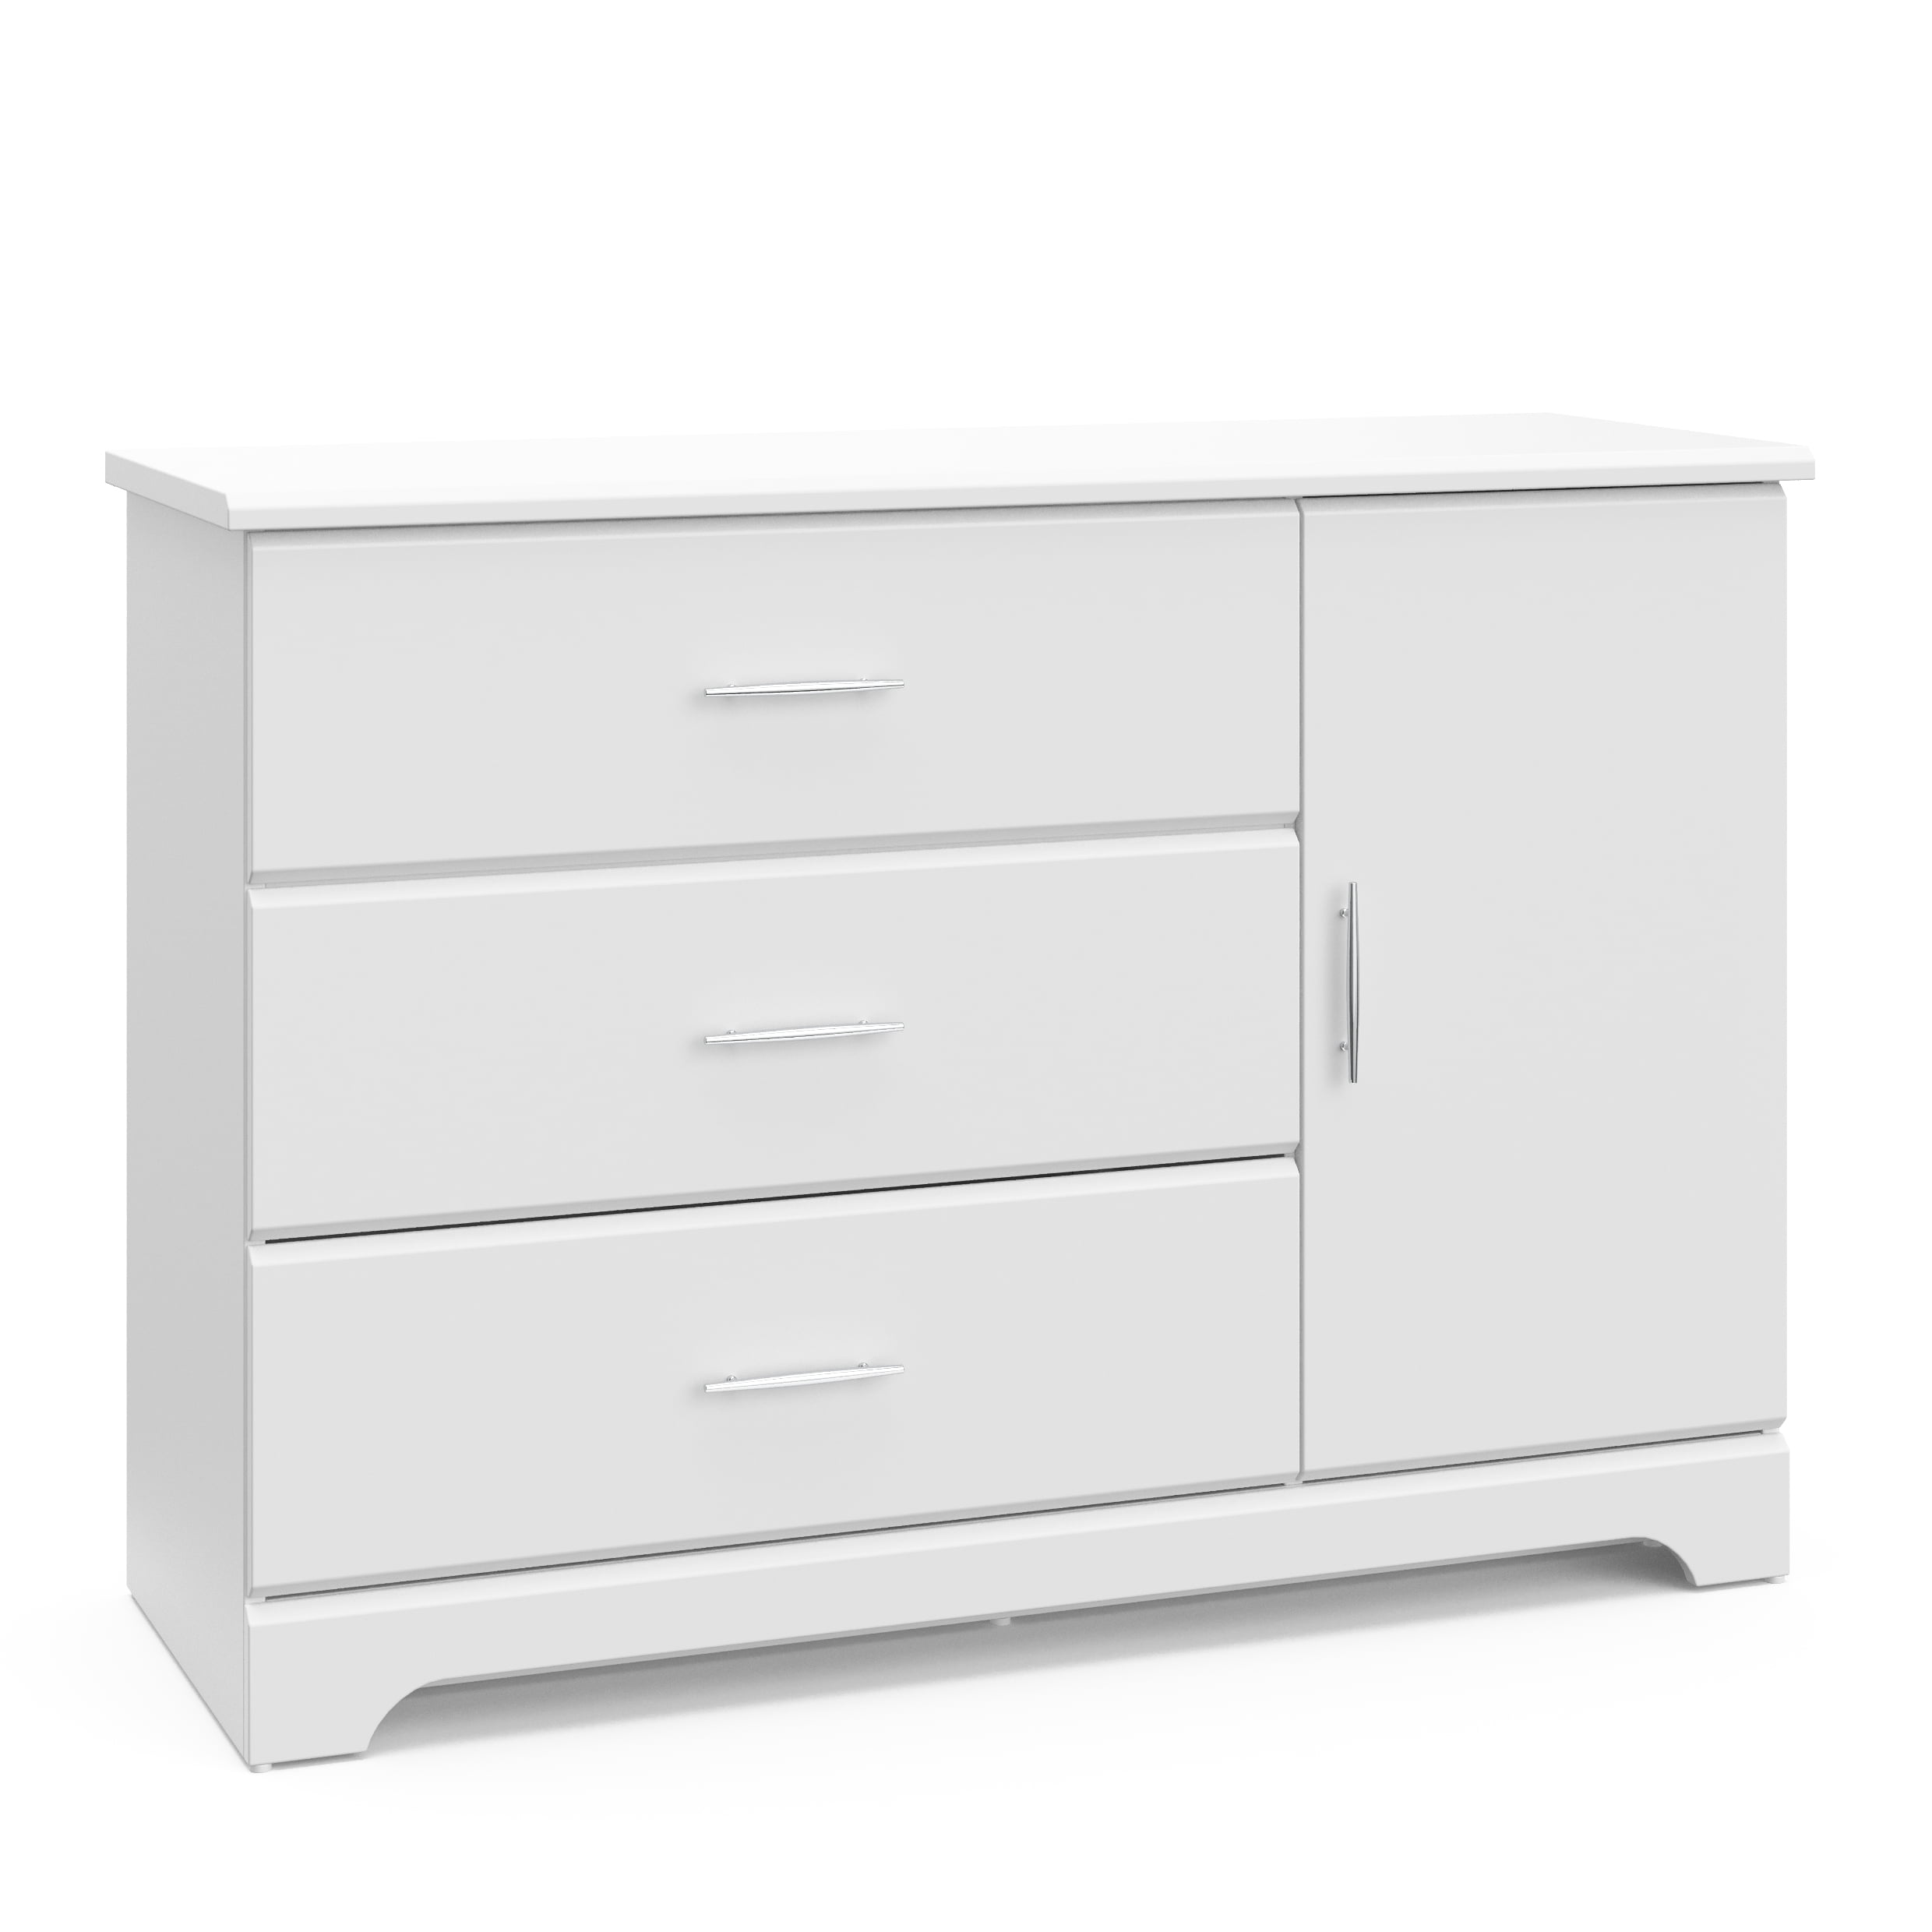 Ideal for Nursery Toddlers Room Kids Room Storkcraft Brookside 3 Drawer Chest Gray Kids Bedroom Dresser with 3 Drawers Wood and Composite Construction 